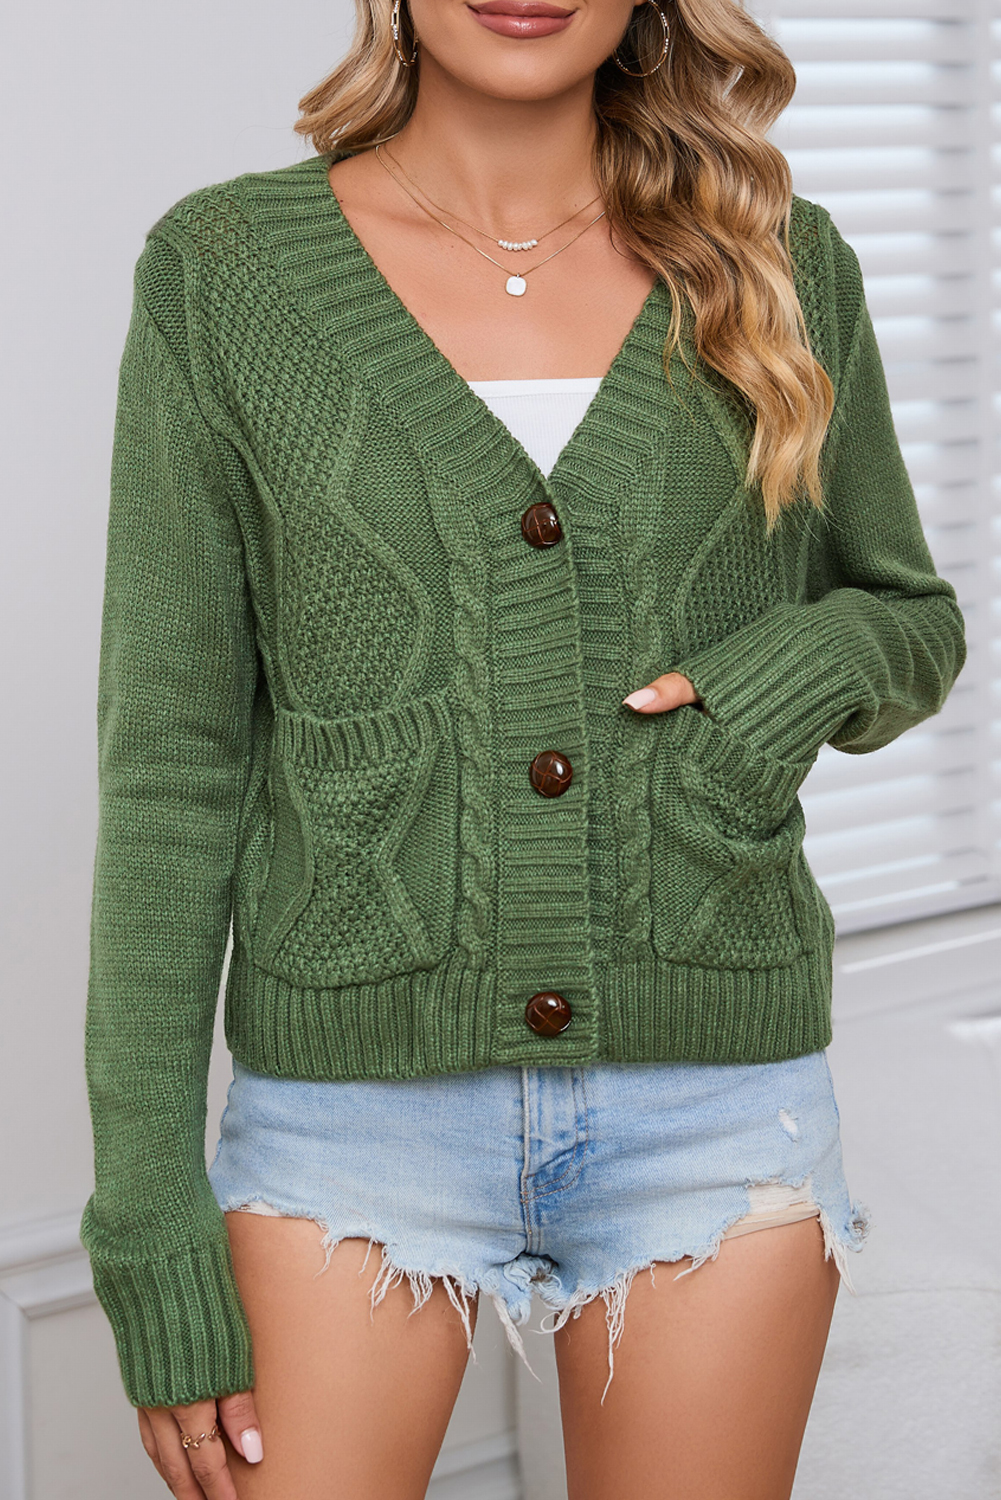 Shewin Wholesale Clothes Suppliers Green Pockets Buttons Textured Cropped SWEATER Cardigan